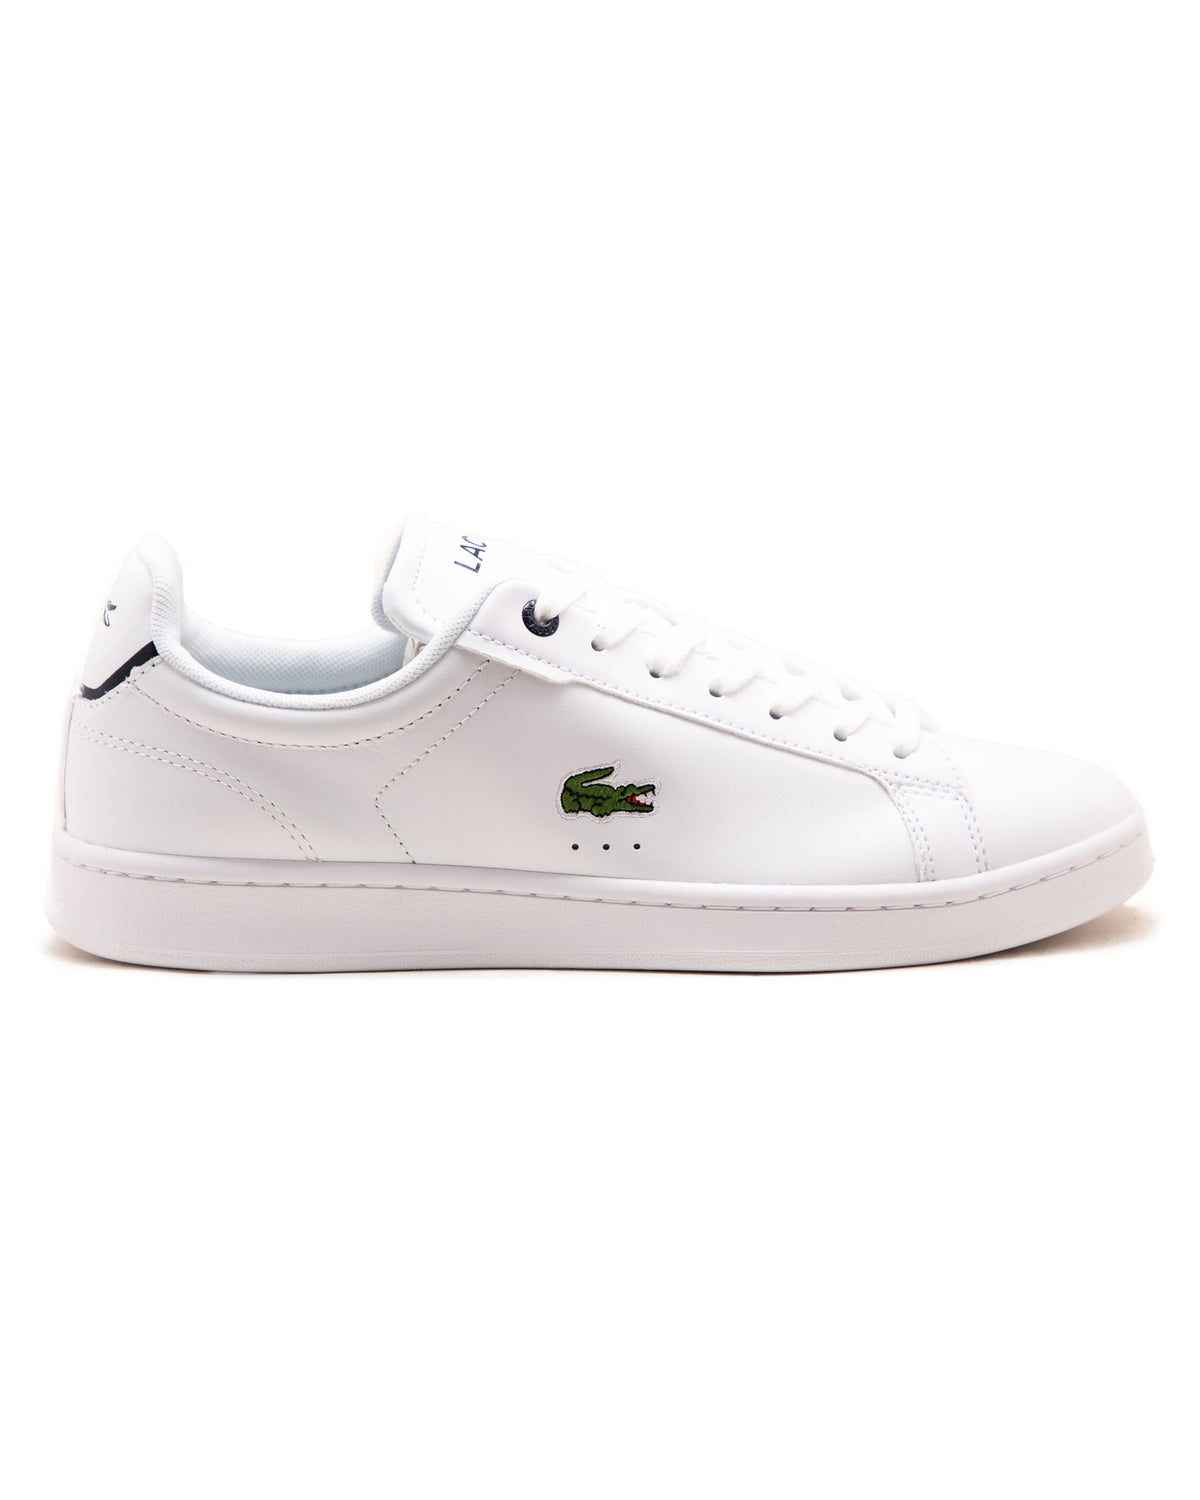 Lacoste Carnaby Pro BL23 White Black